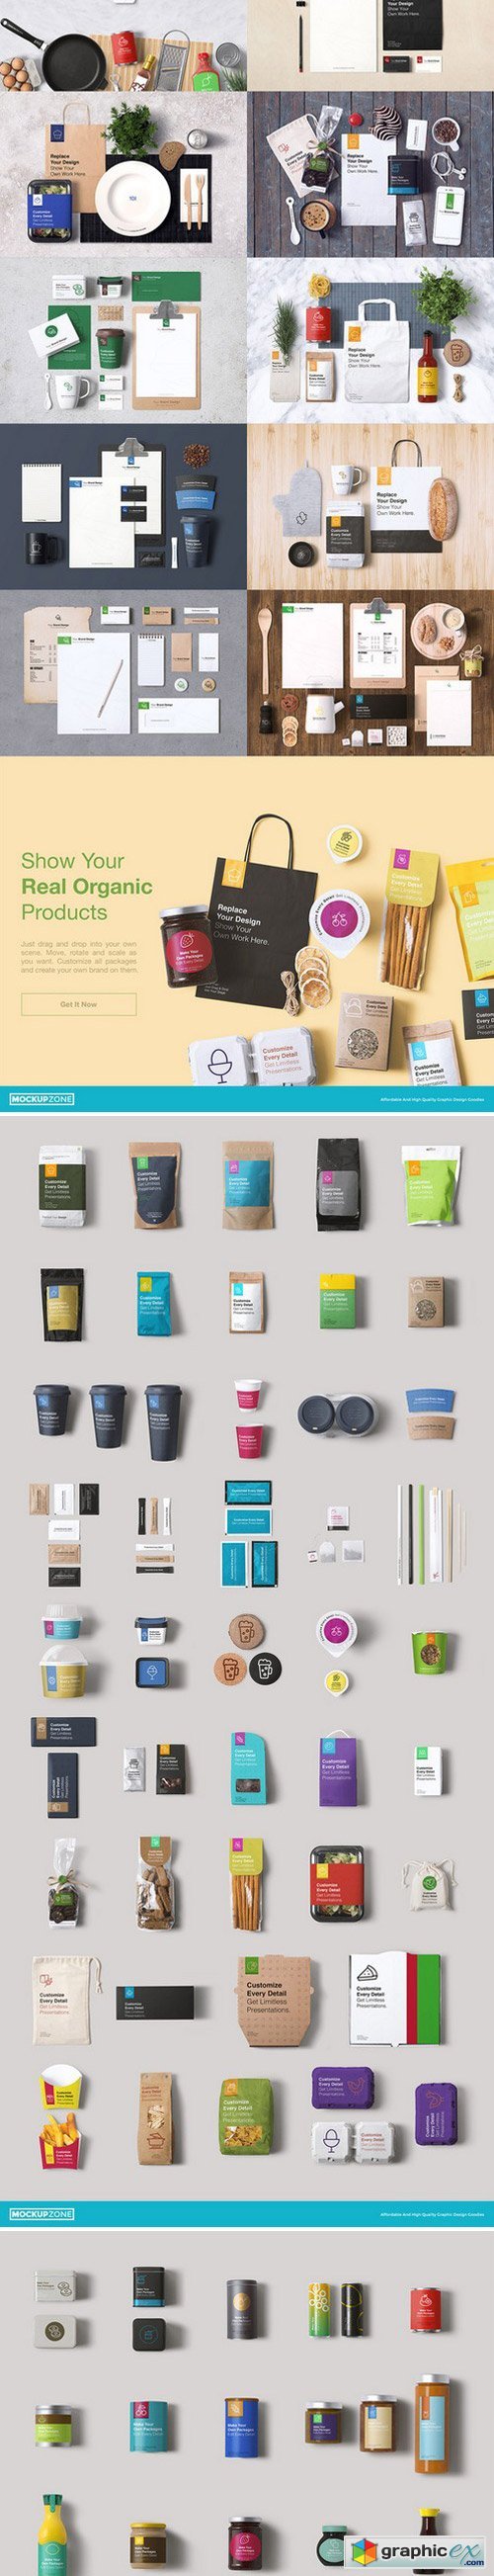 Download Coffee Branding & Packages Mock Up » Free Download Vector Stock Image Photoshop Icon